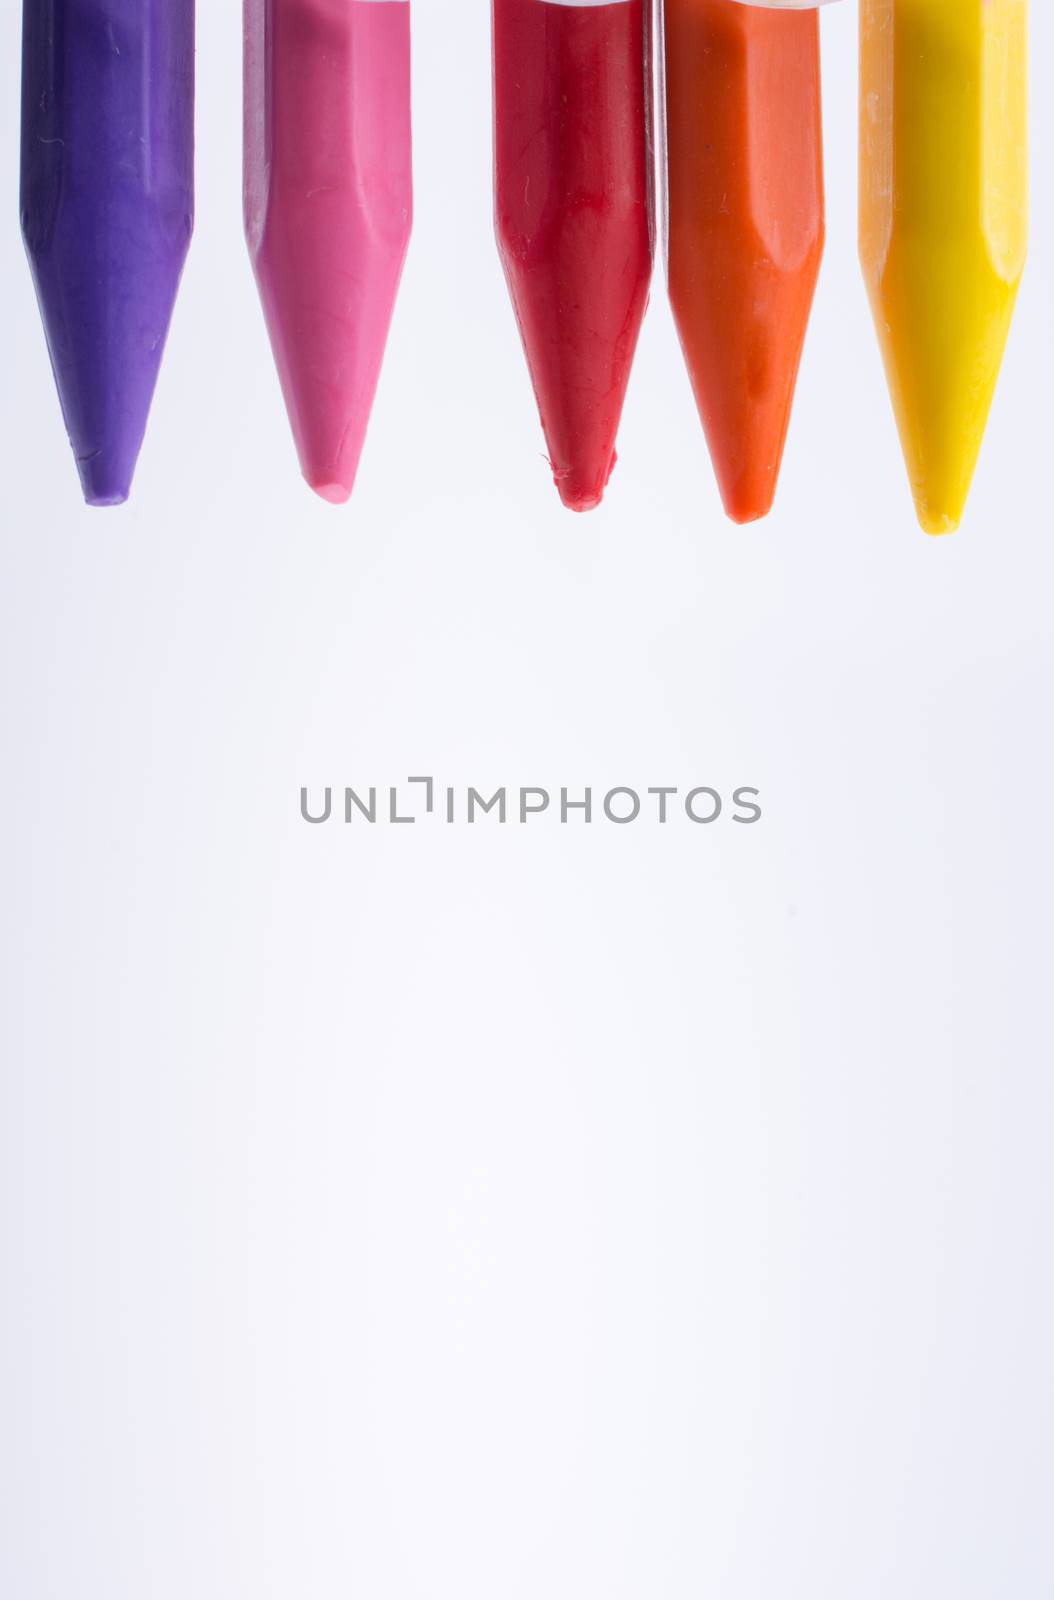 Crayons of various color on white background